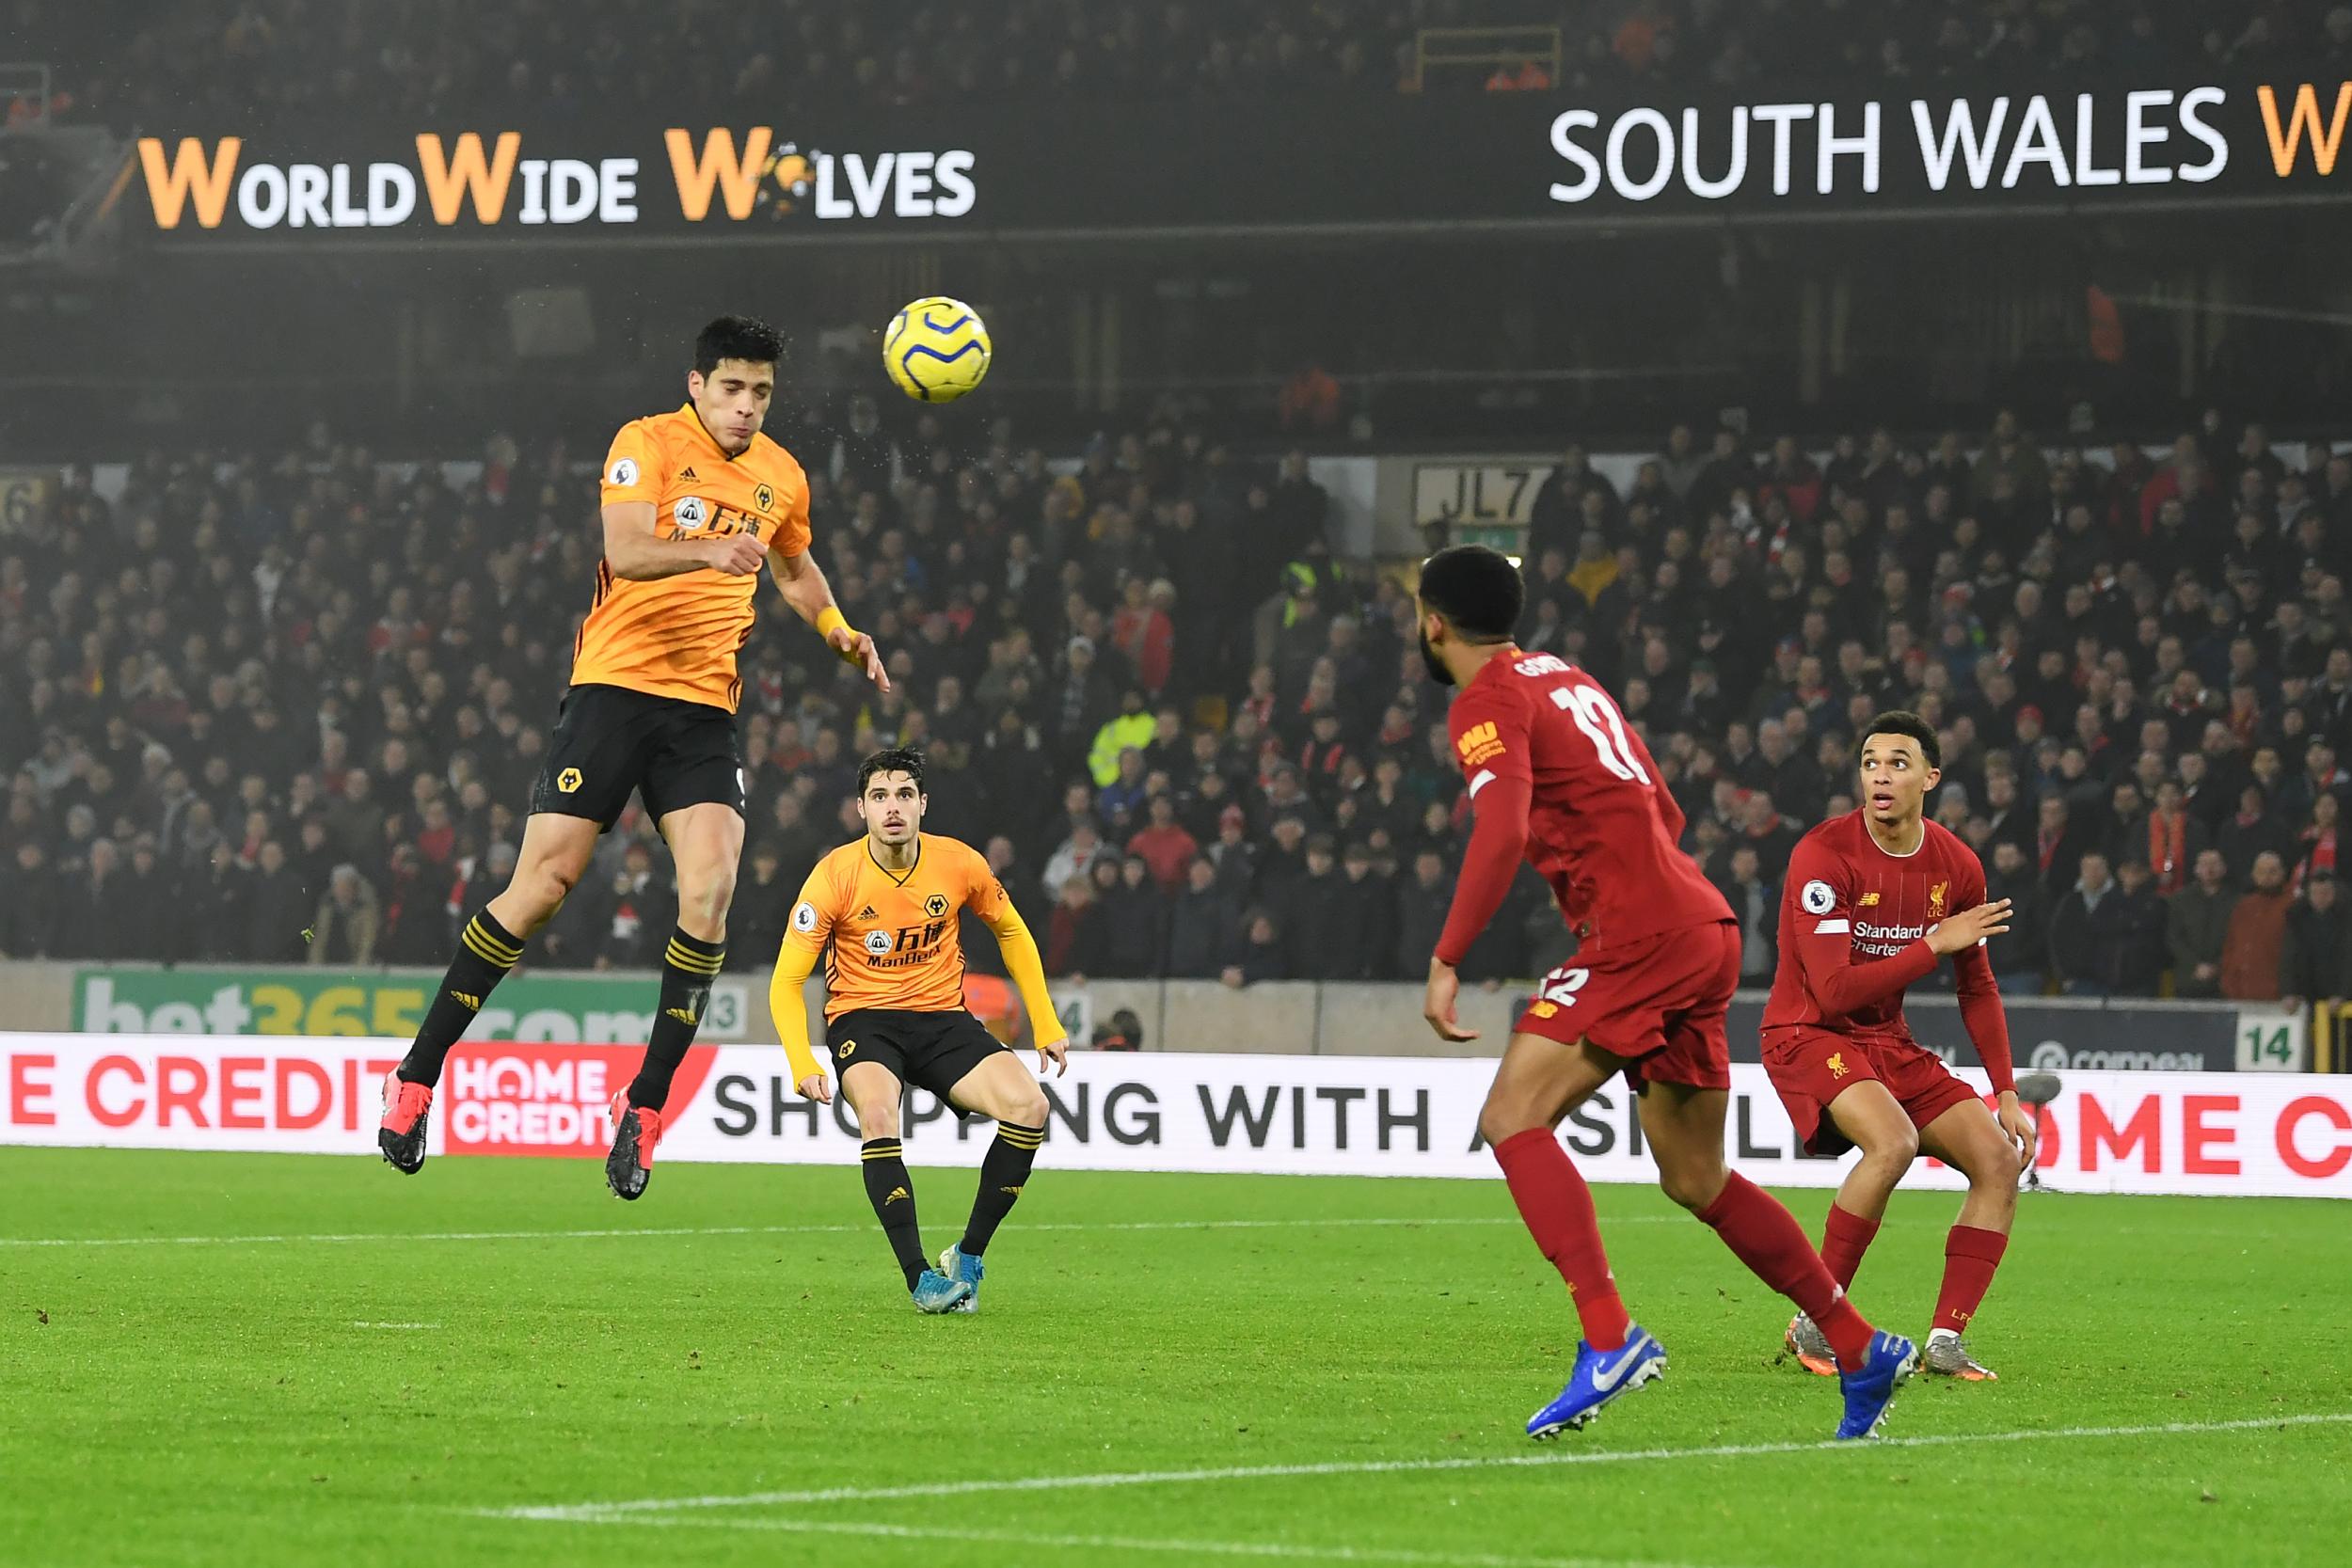 Raul Jimenez levelled the score with his headed effort